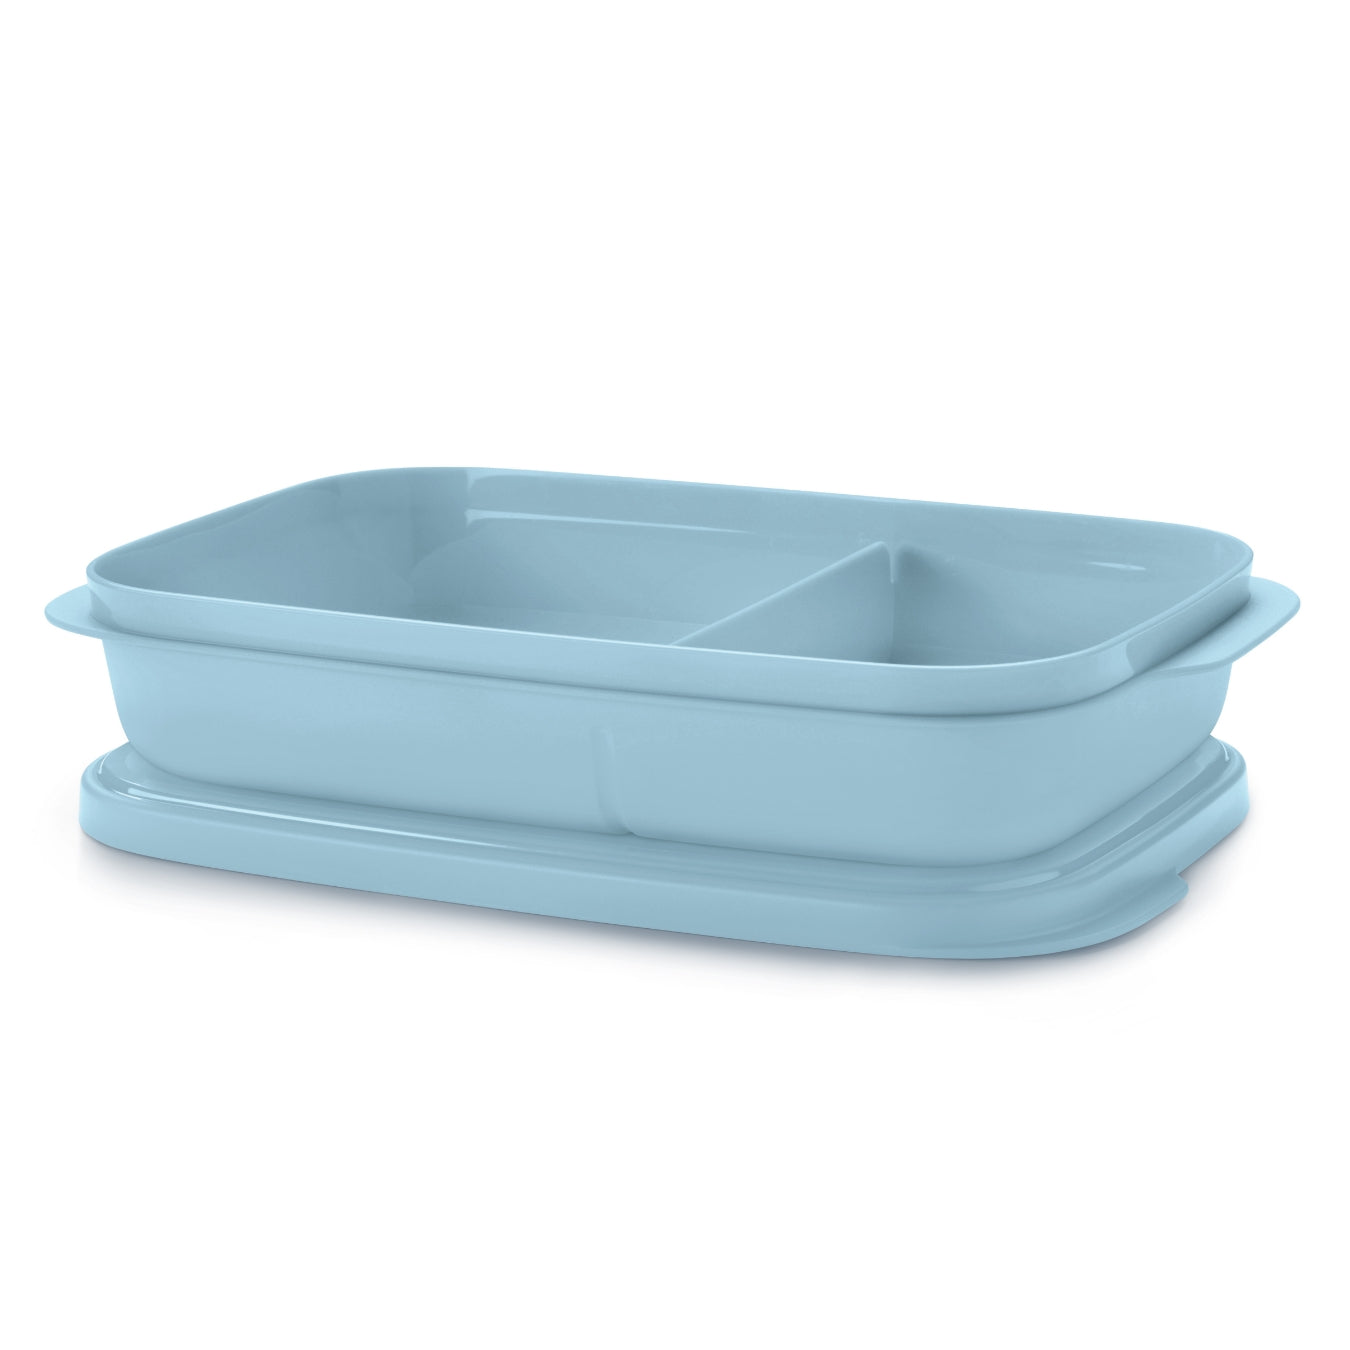 ECO+ SLIM LUNCH CONTAINER – Tupperware Direct